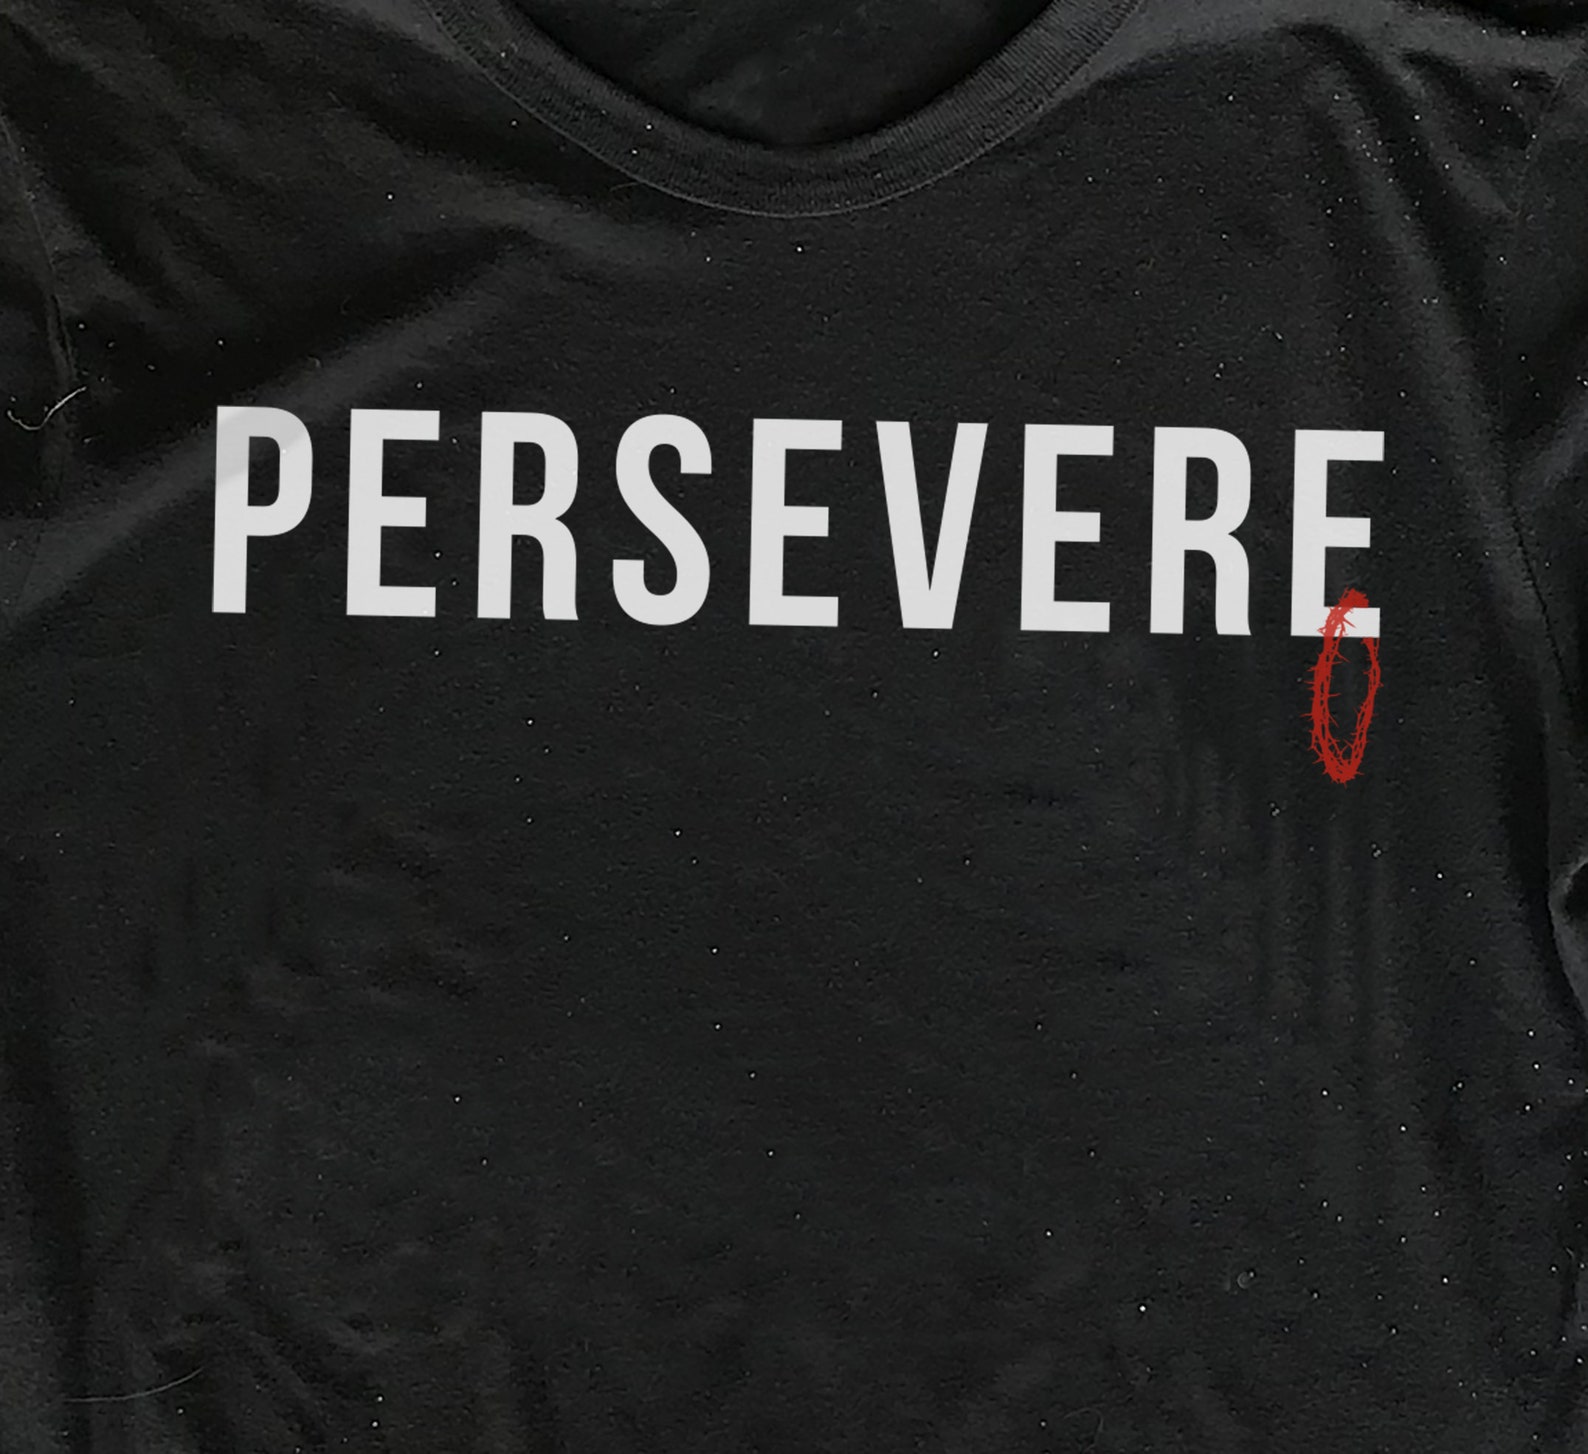 Persevere Shirt Workout Shirts Christian Shirts for Men - Etsy